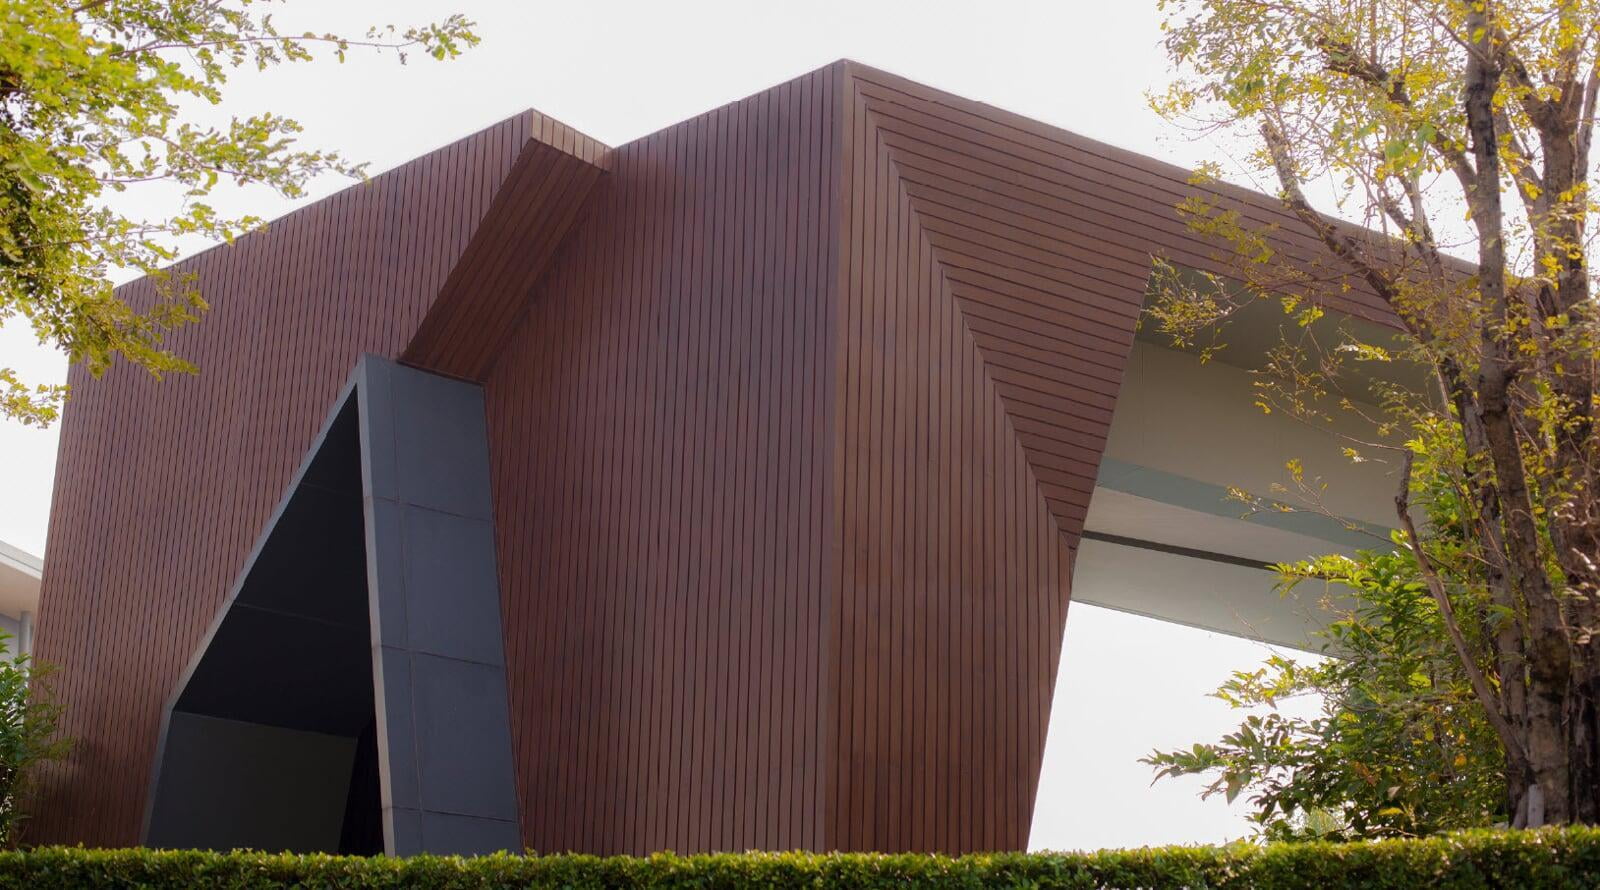 SHEREA Strip is a fire resistant decorative facade material